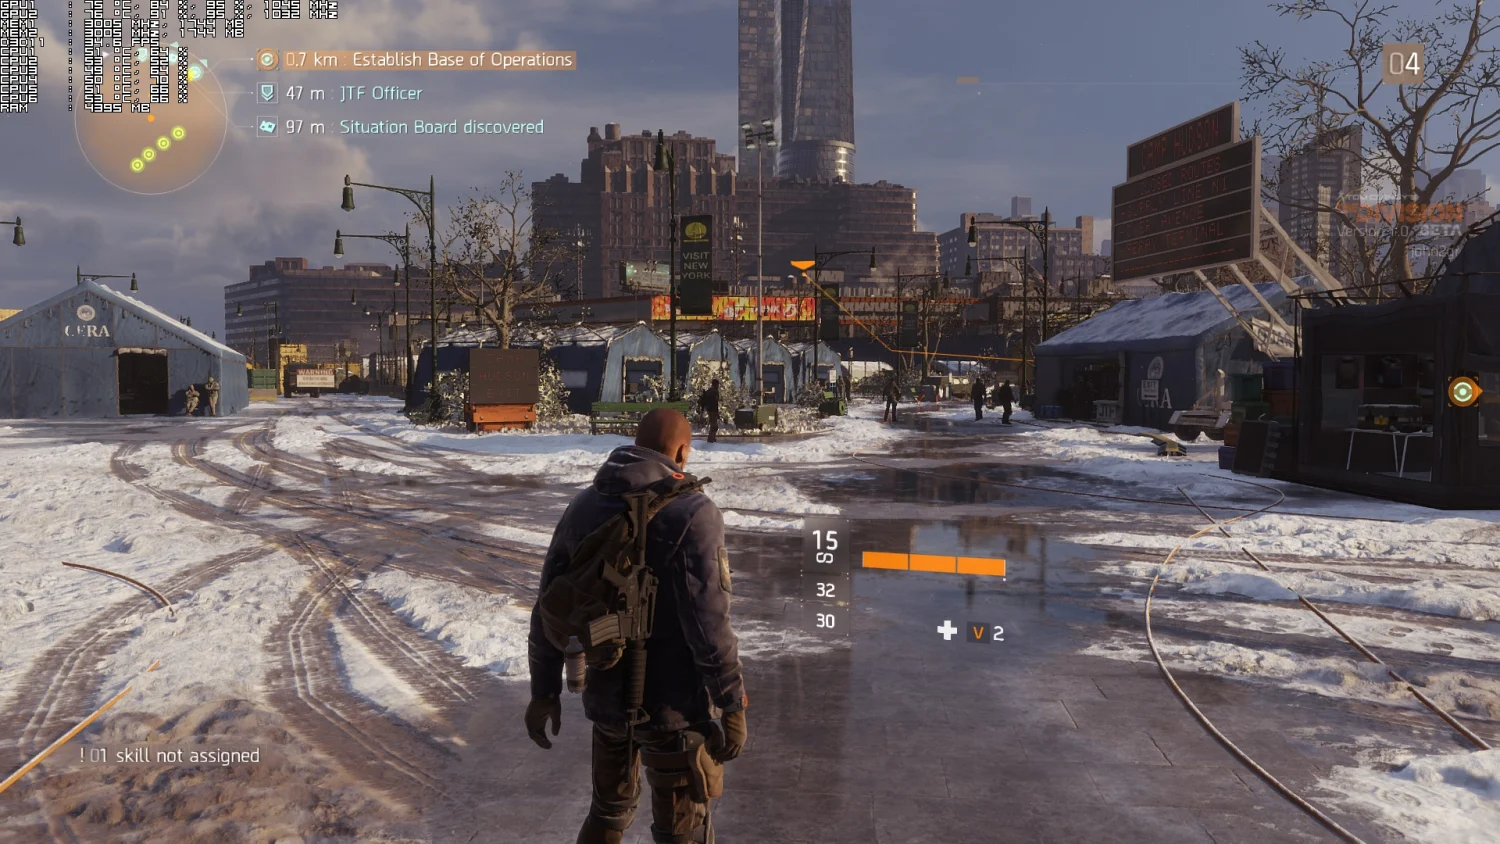 Jogo The Division PS4